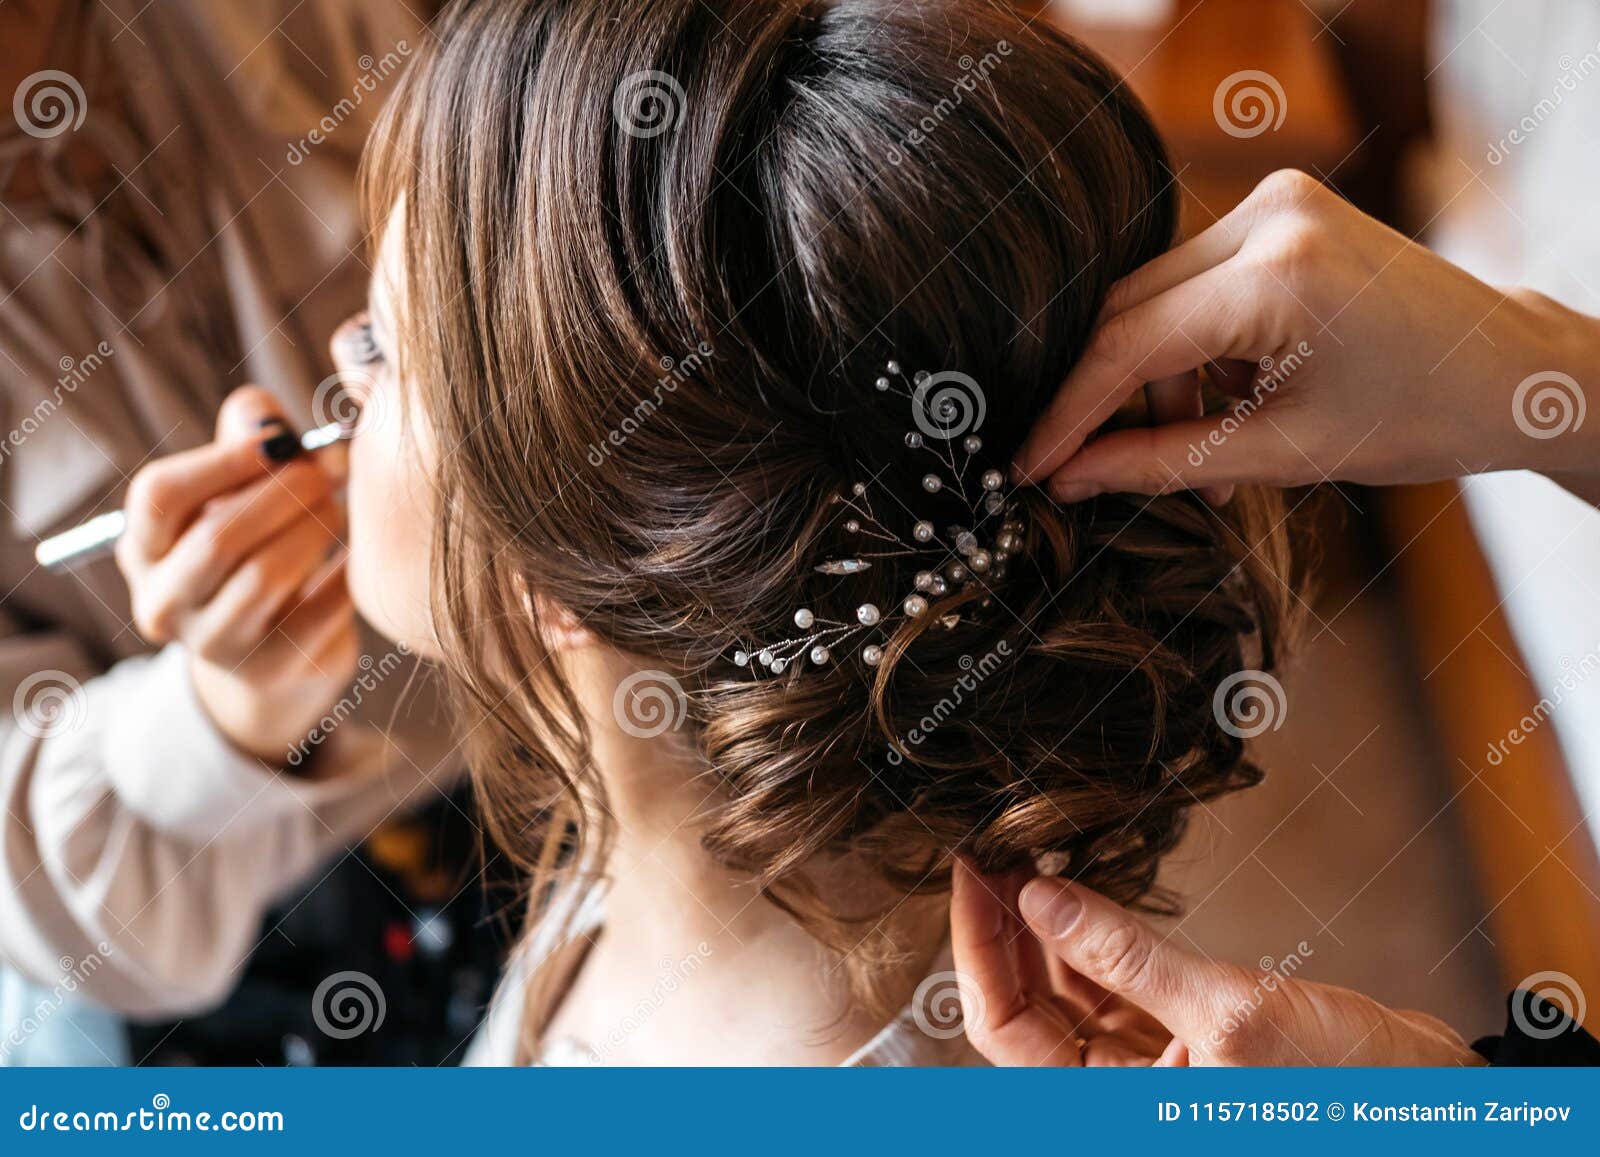 a hair stylist and make-up artist prepare a bride for the wedding day